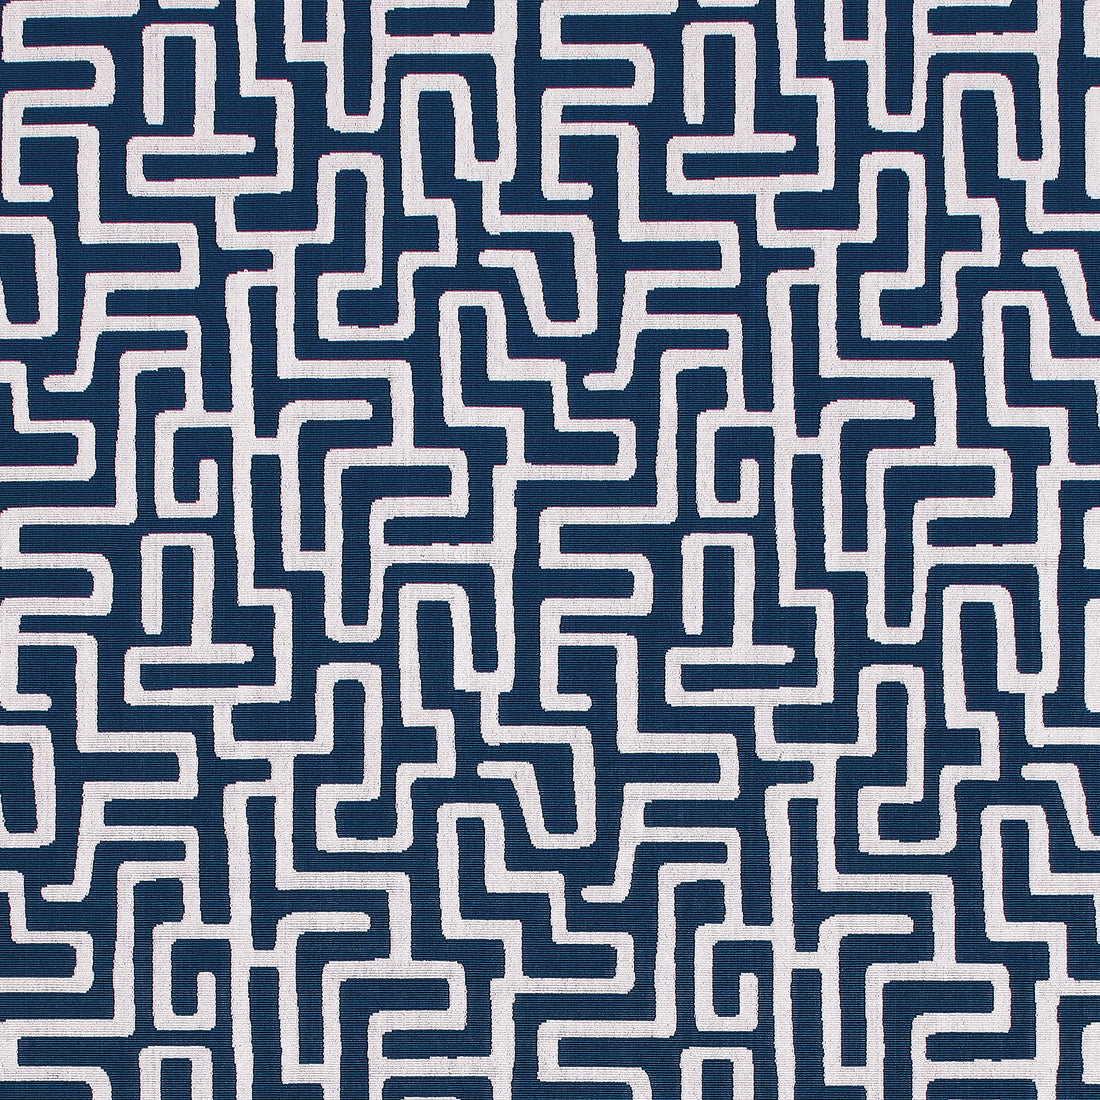 Terrace Lane fabric in navy color - pattern number W742031 - by Thibaut in the Sojourn collection